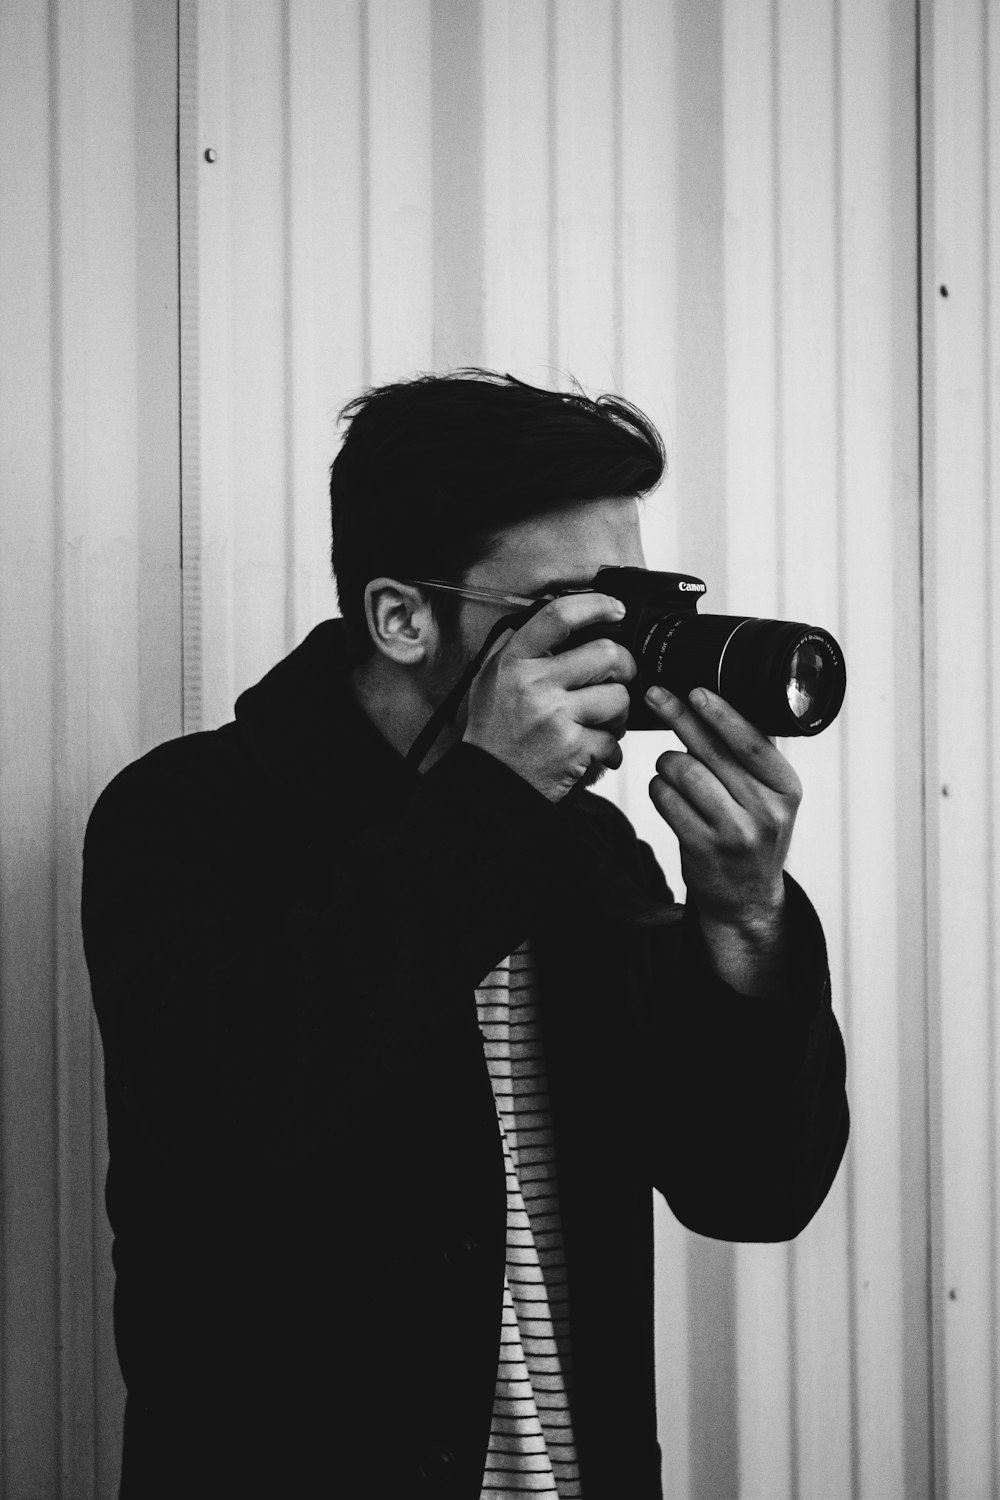 grayscale photograph of man holding DSLR camera while taking photo